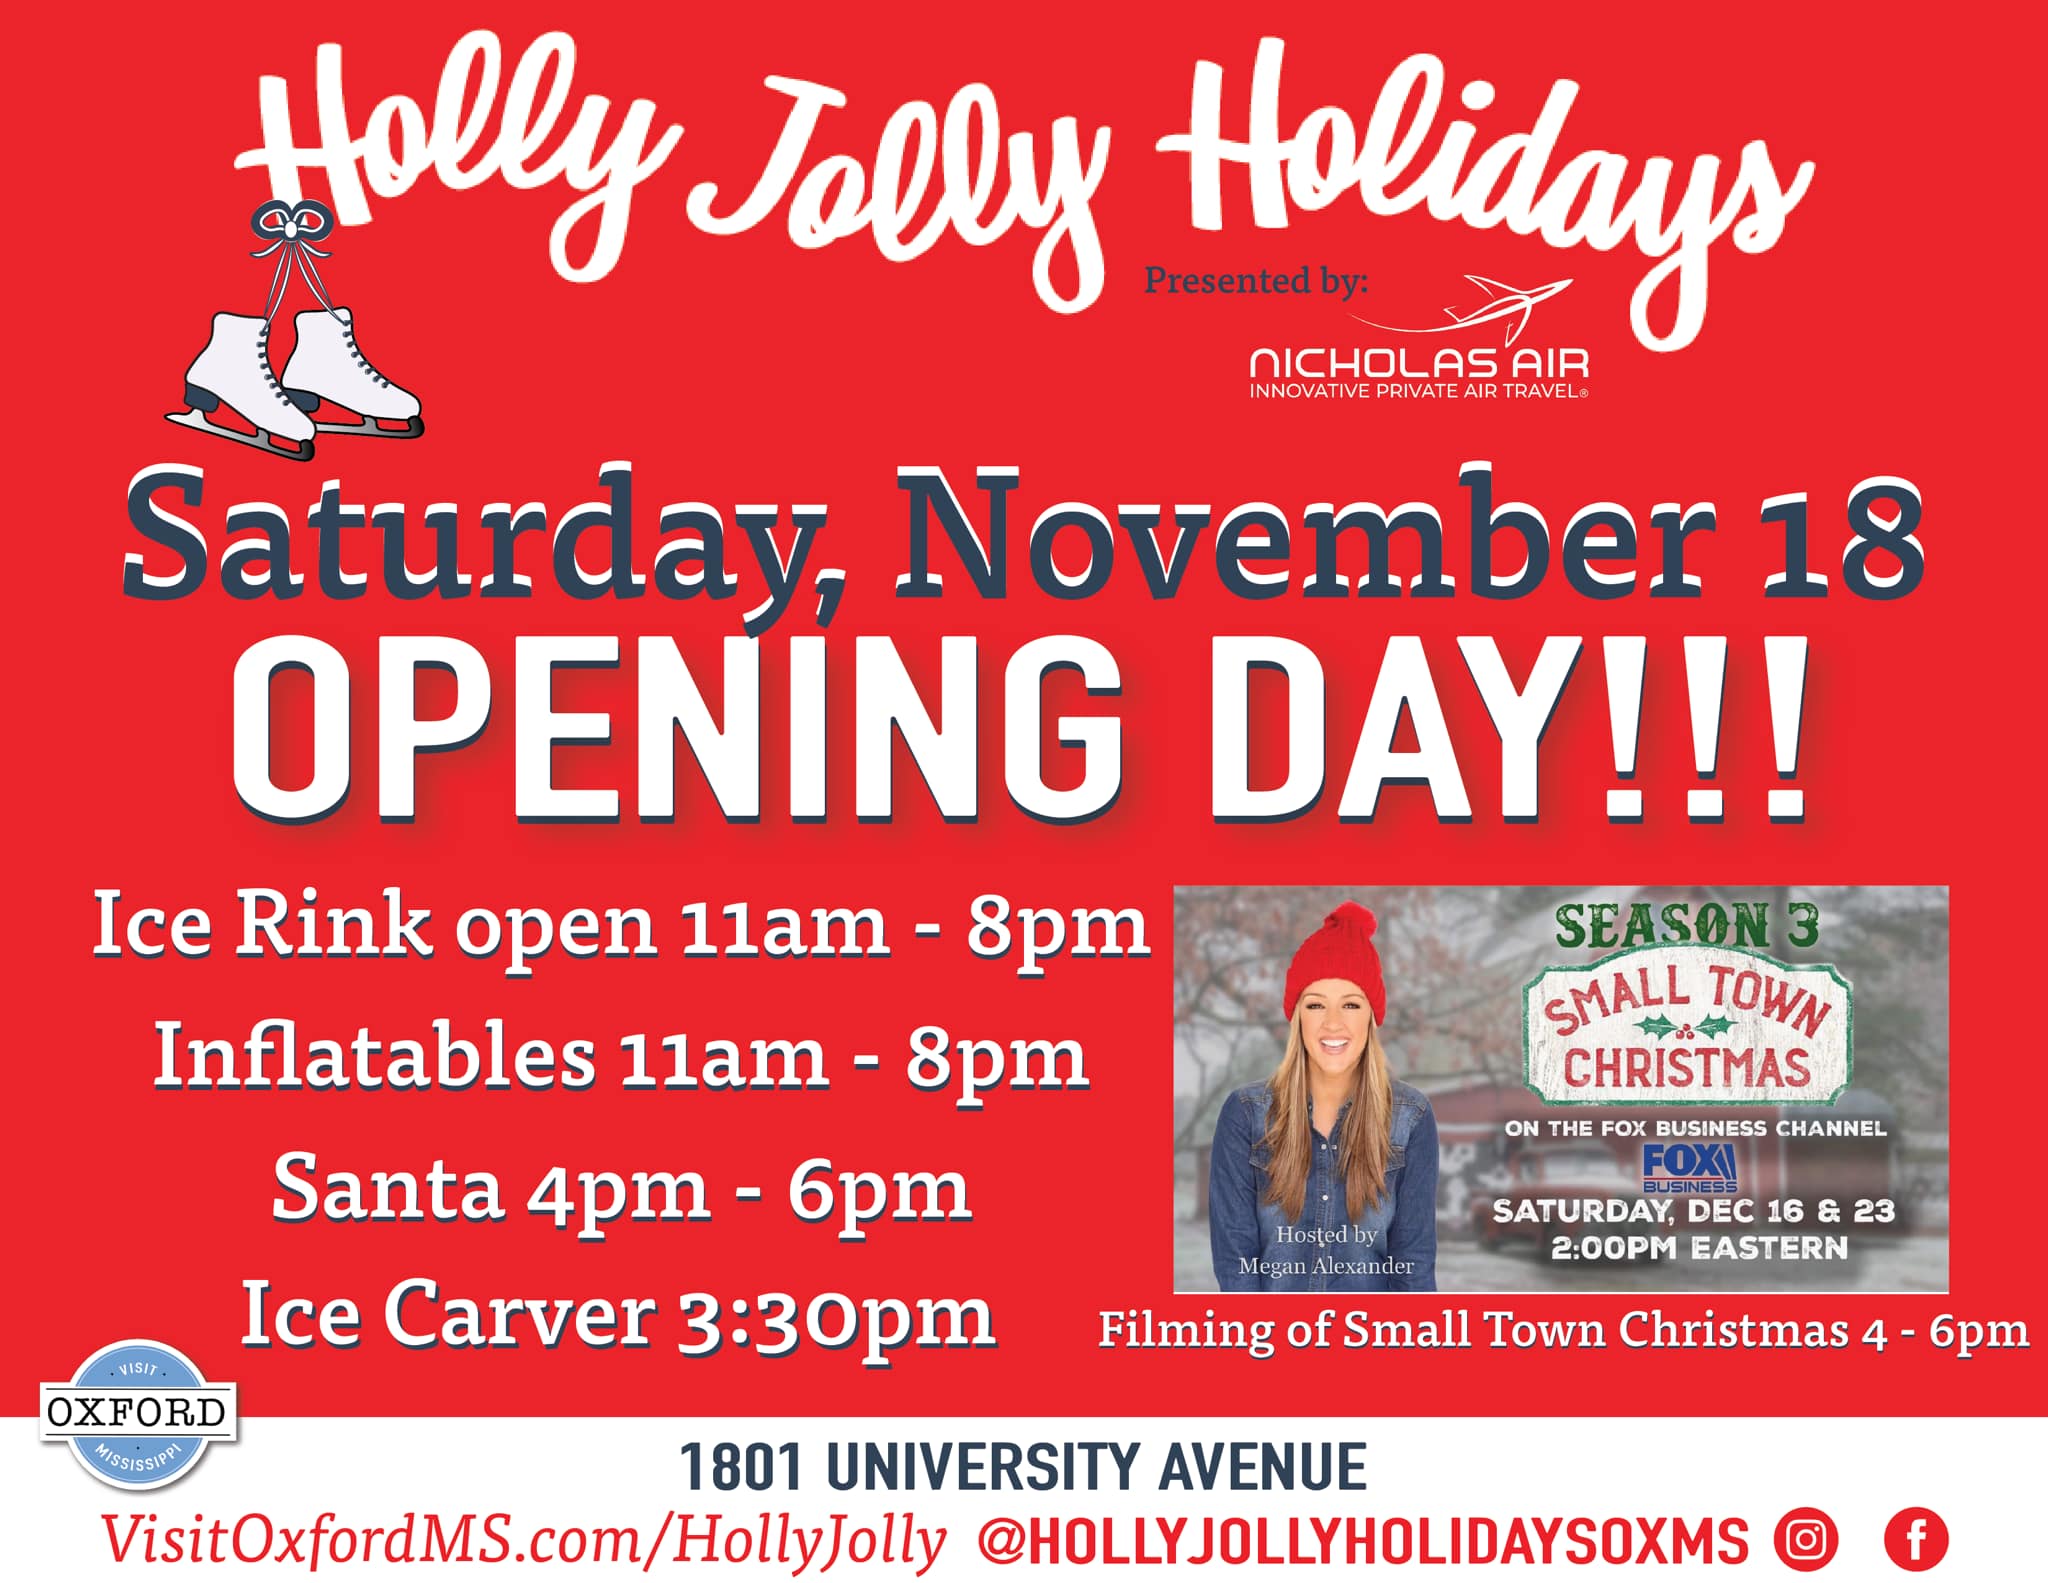 Holly Jolly Holidays Kicks Off Saturday with the Opening of the Ice Rink;  Square Lighting on Sunday 